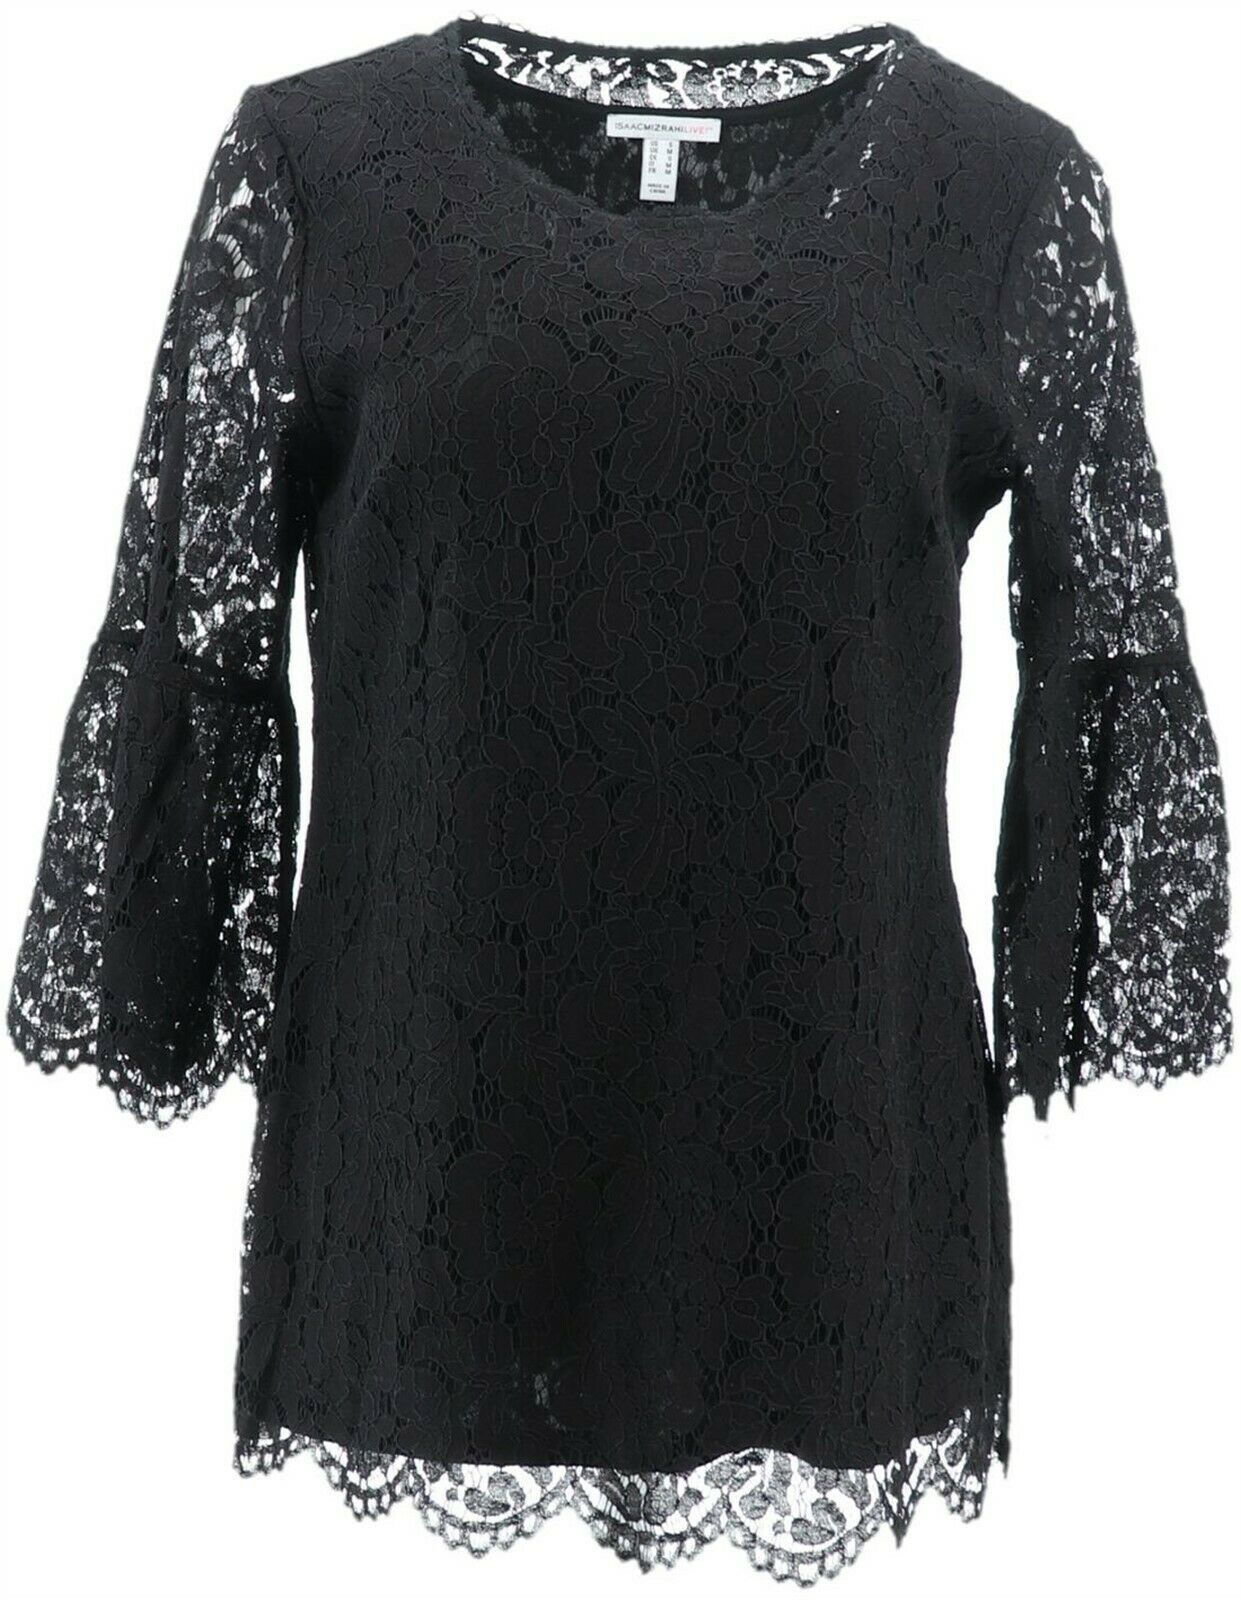 Isaac Mizrahi Floral Lace 3/4 Bell Slv Tunic Black XS NEW A306931